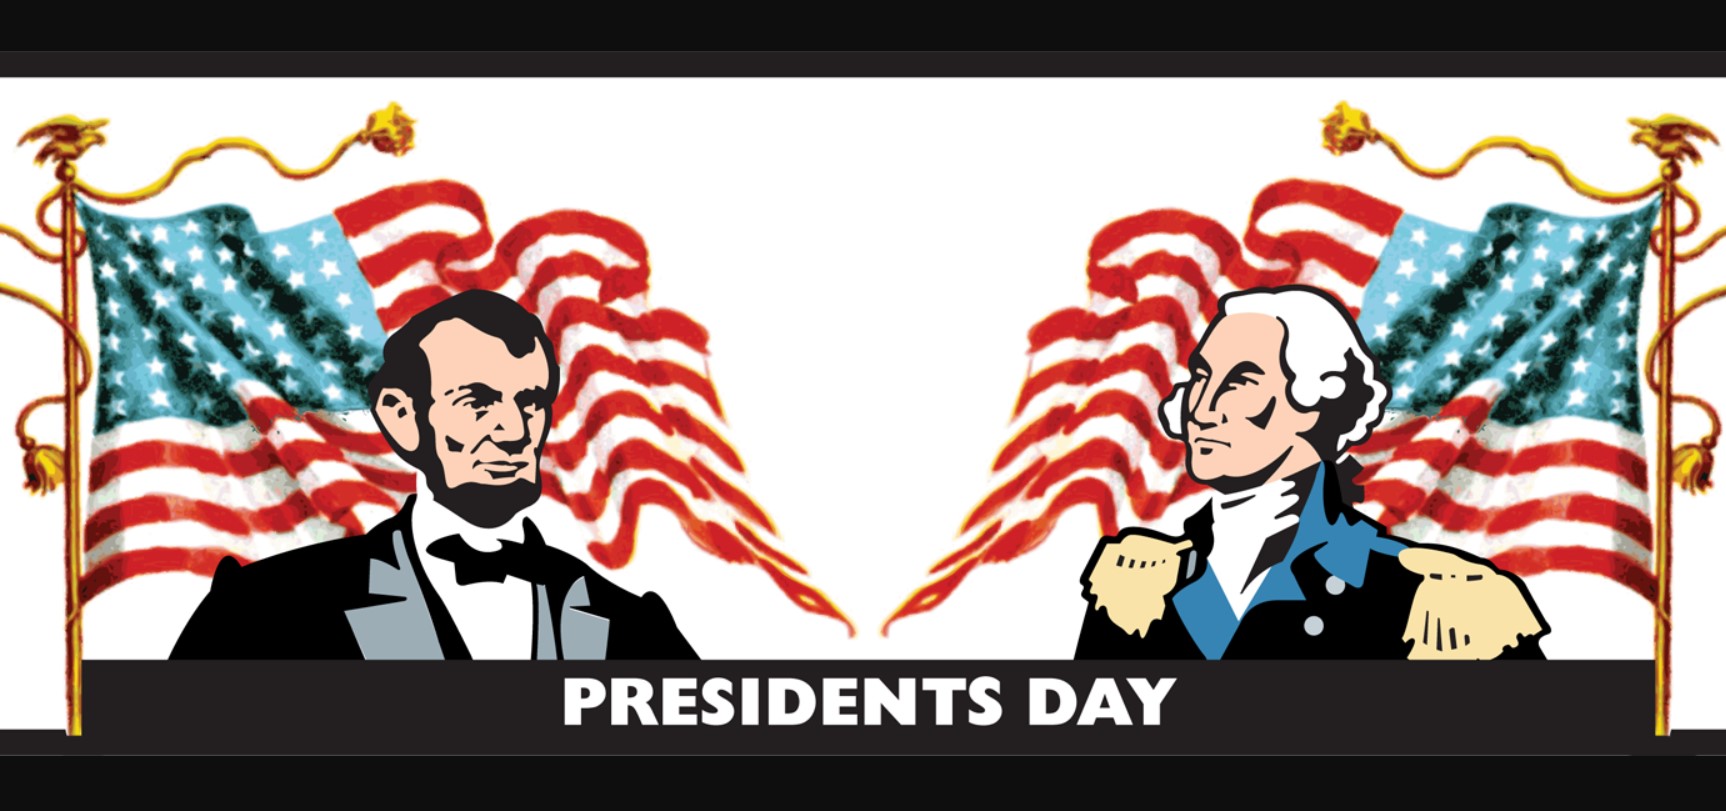 Presidents Day 2022, Presidents Day 2022 images